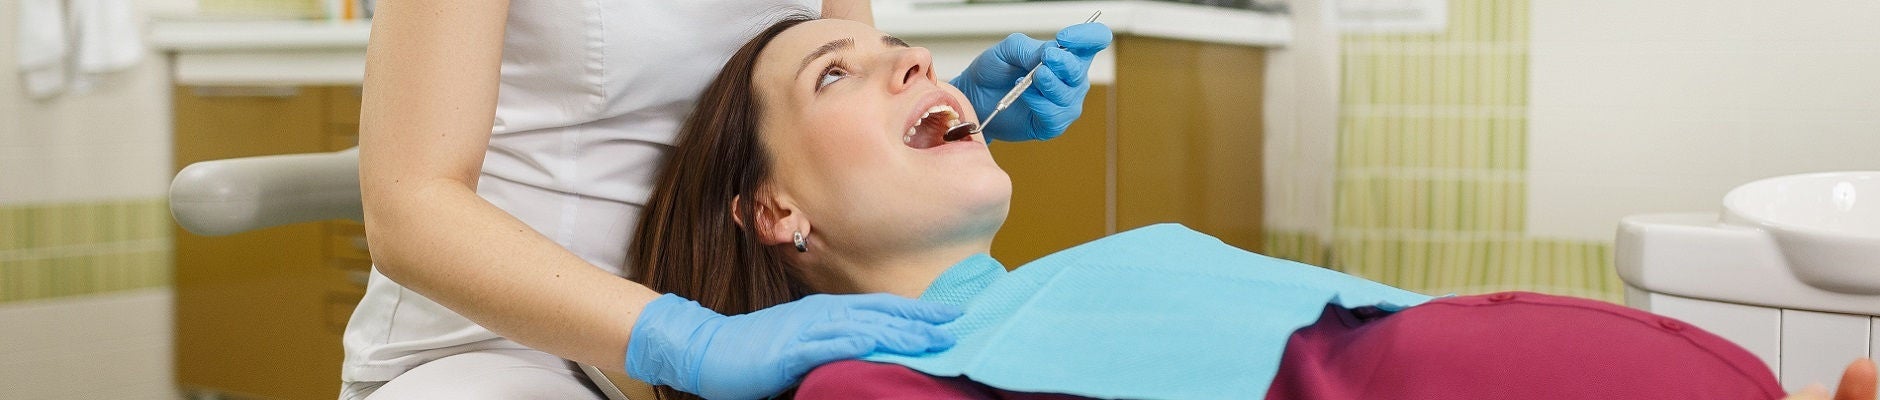 Scheduled appointment in dental clinic for pregnant woman